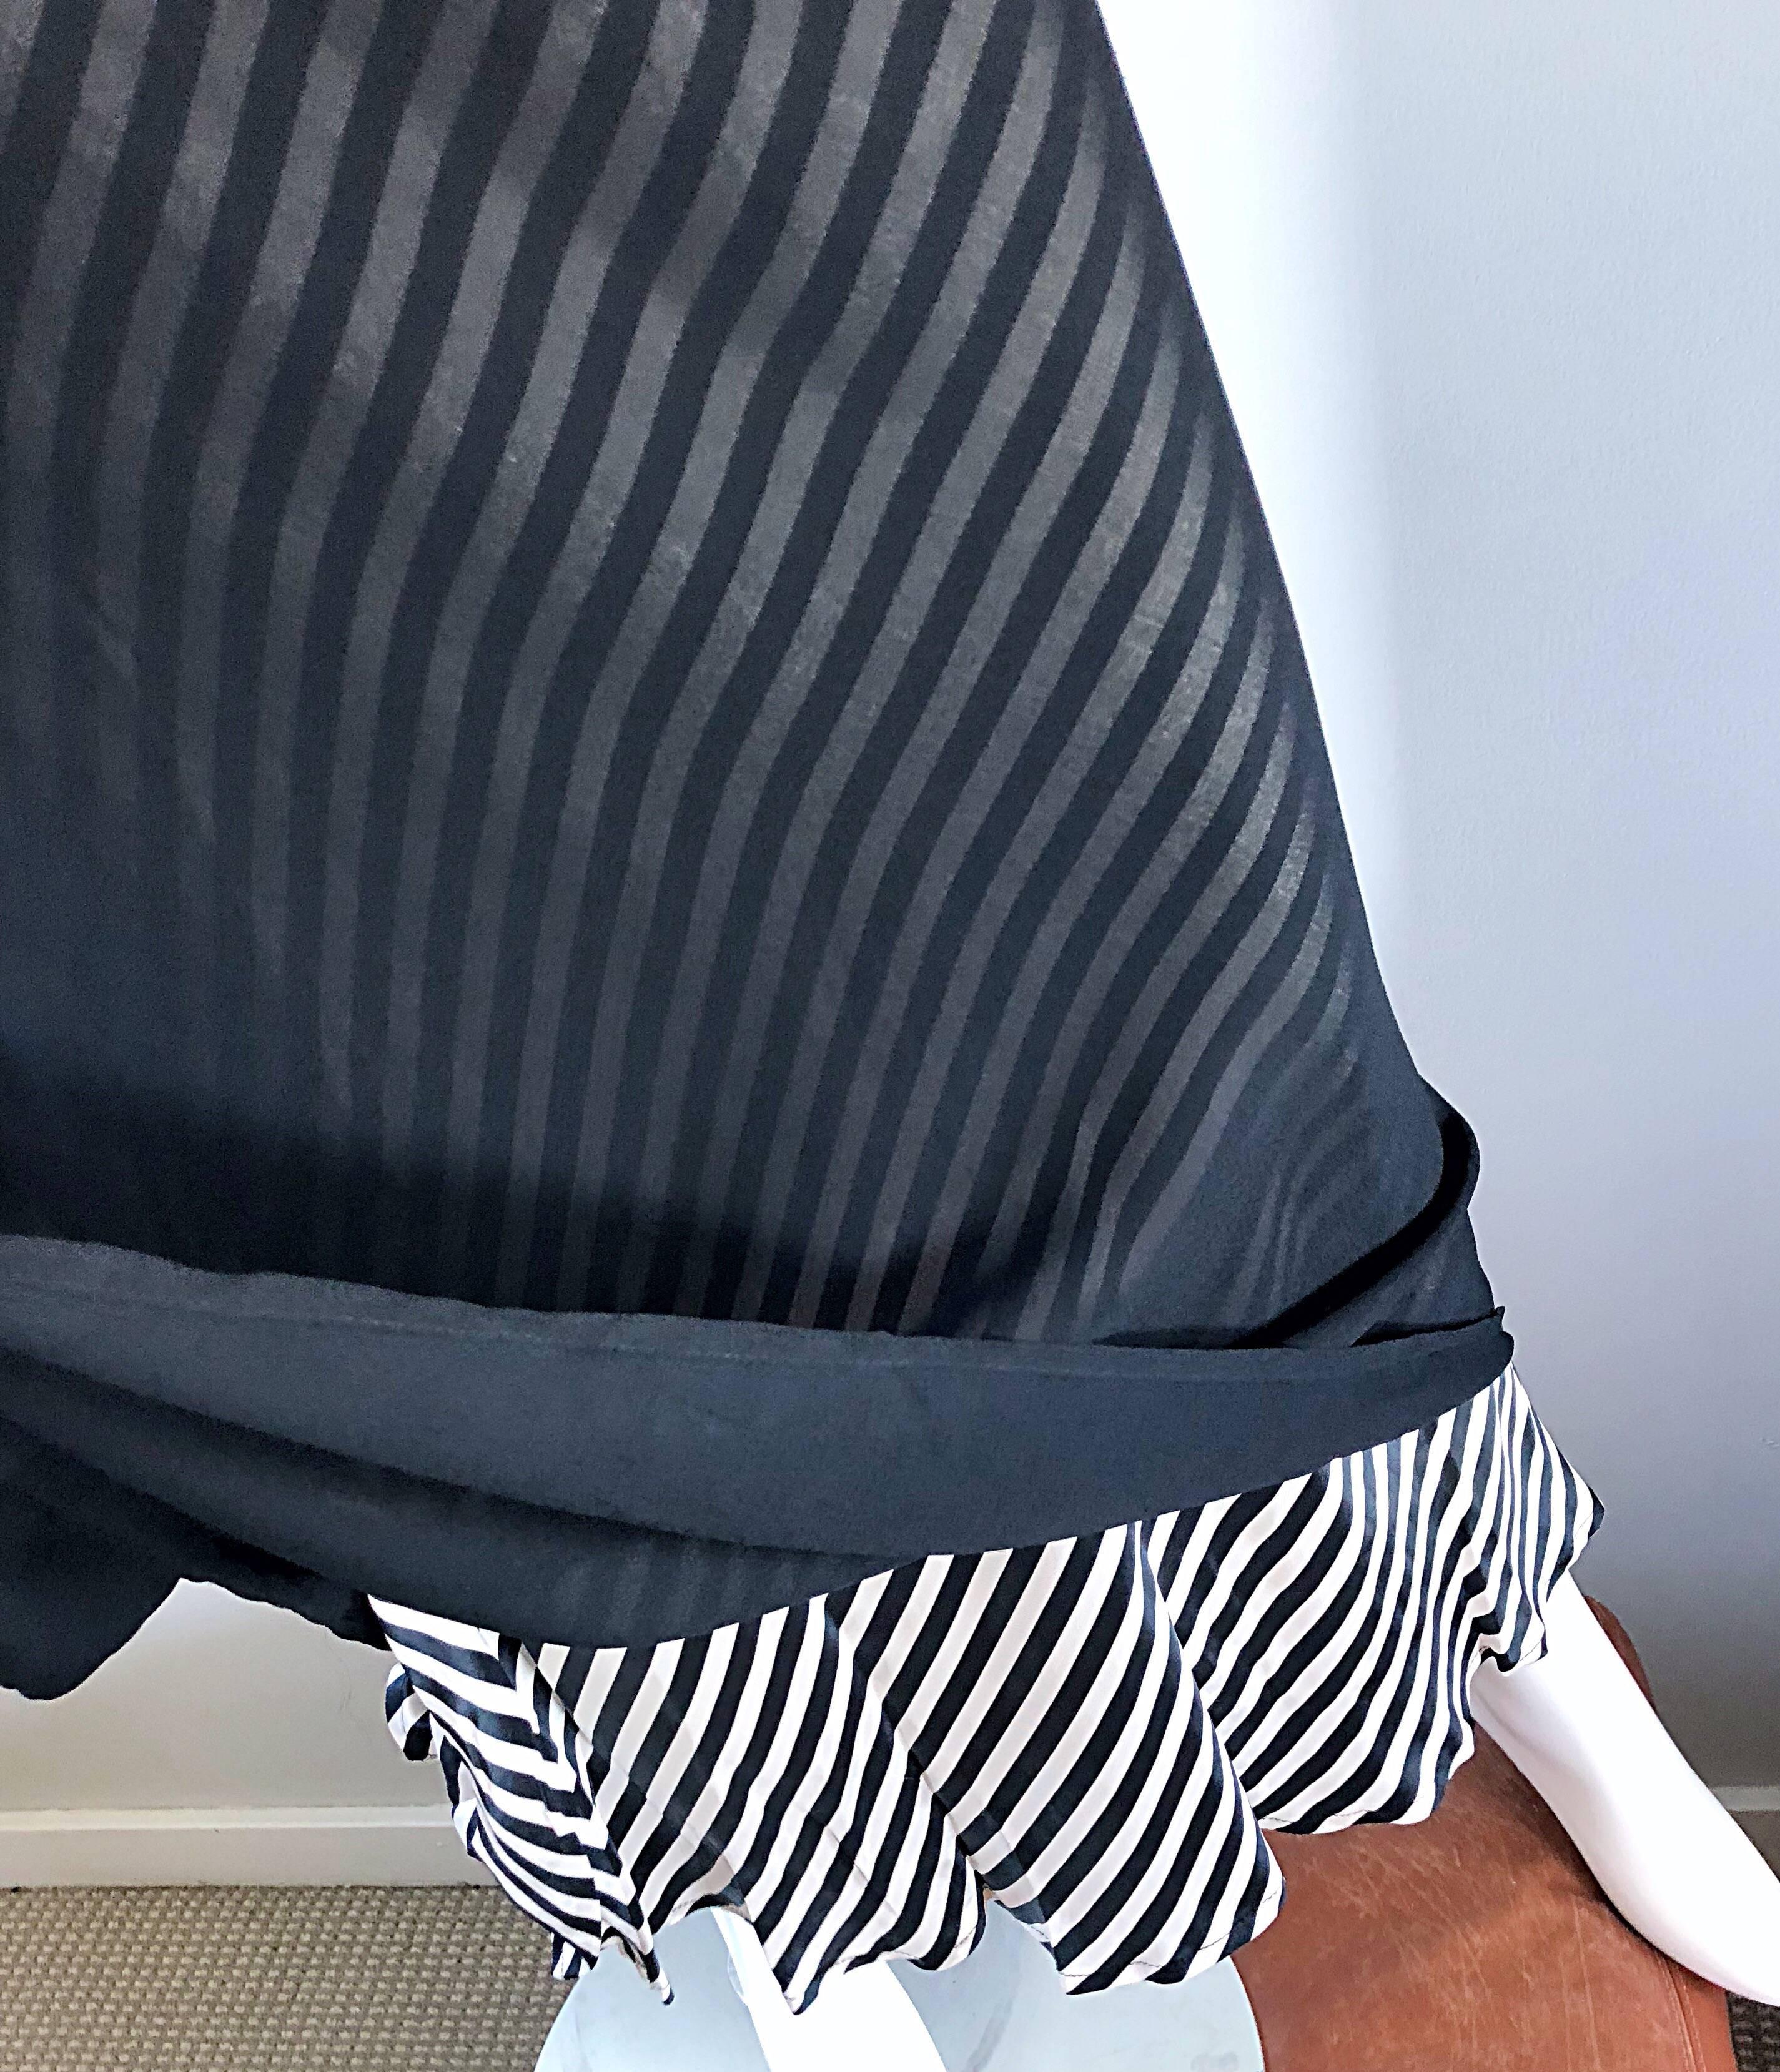 Moschino Cheap & Chic 1990s Size 12 Black and White Striped Vintage Maxi Skirt In Excellent Condition For Sale In San Diego, CA